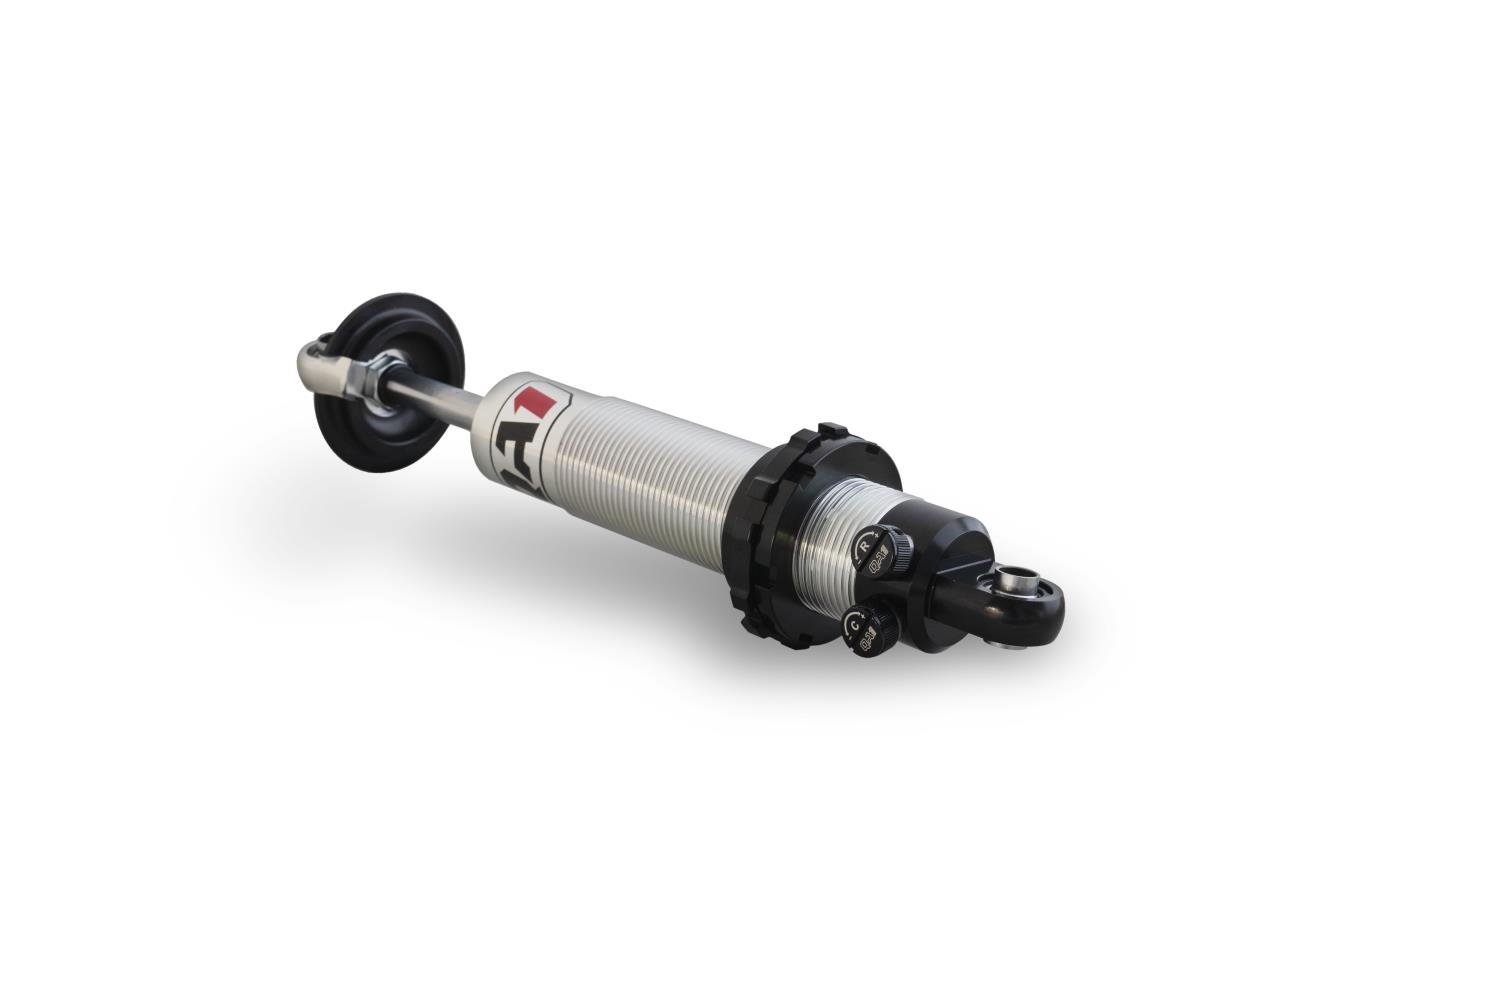 DD401 Double Adjustable Shock Compressed Height: 10-1/8"